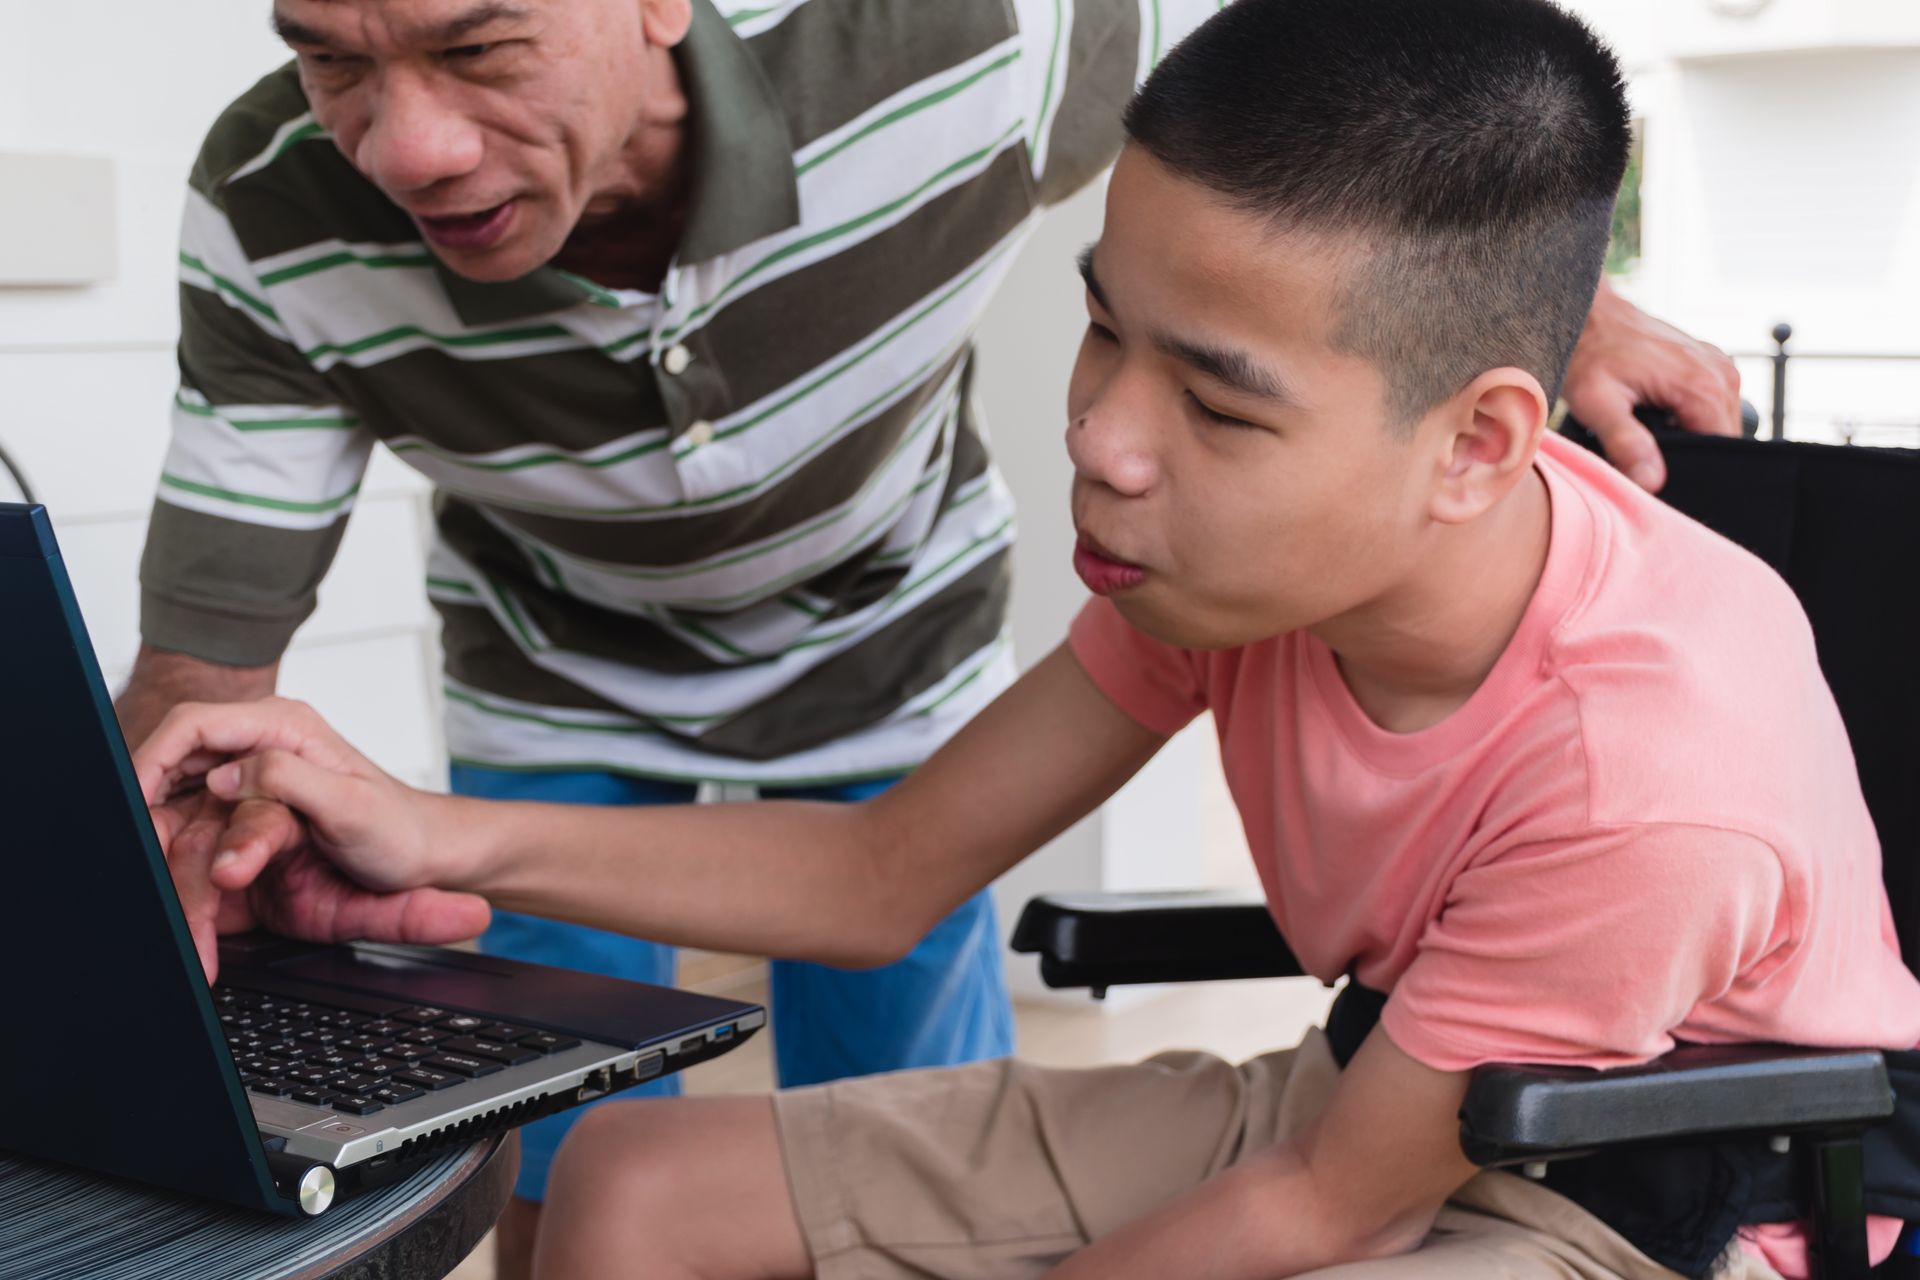 A young boy with a cognitive disability leans over a computer with an older male, pointing towards the screen